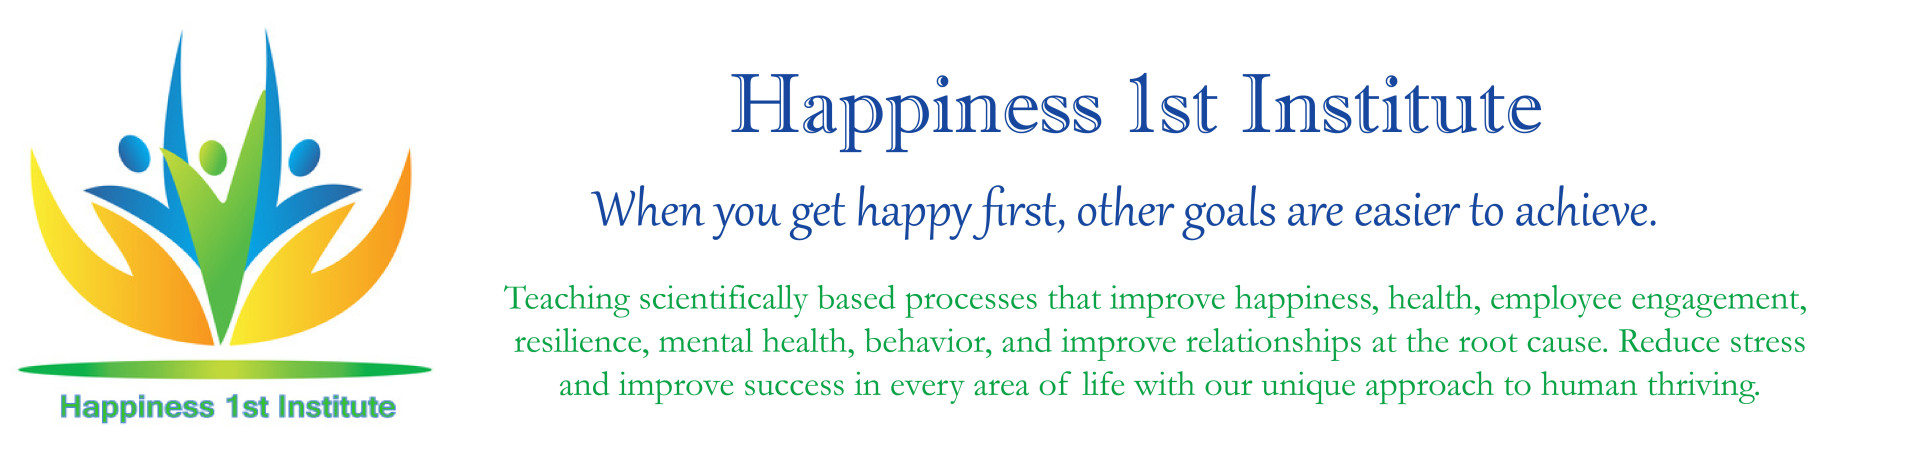 Happiness 1st Institute